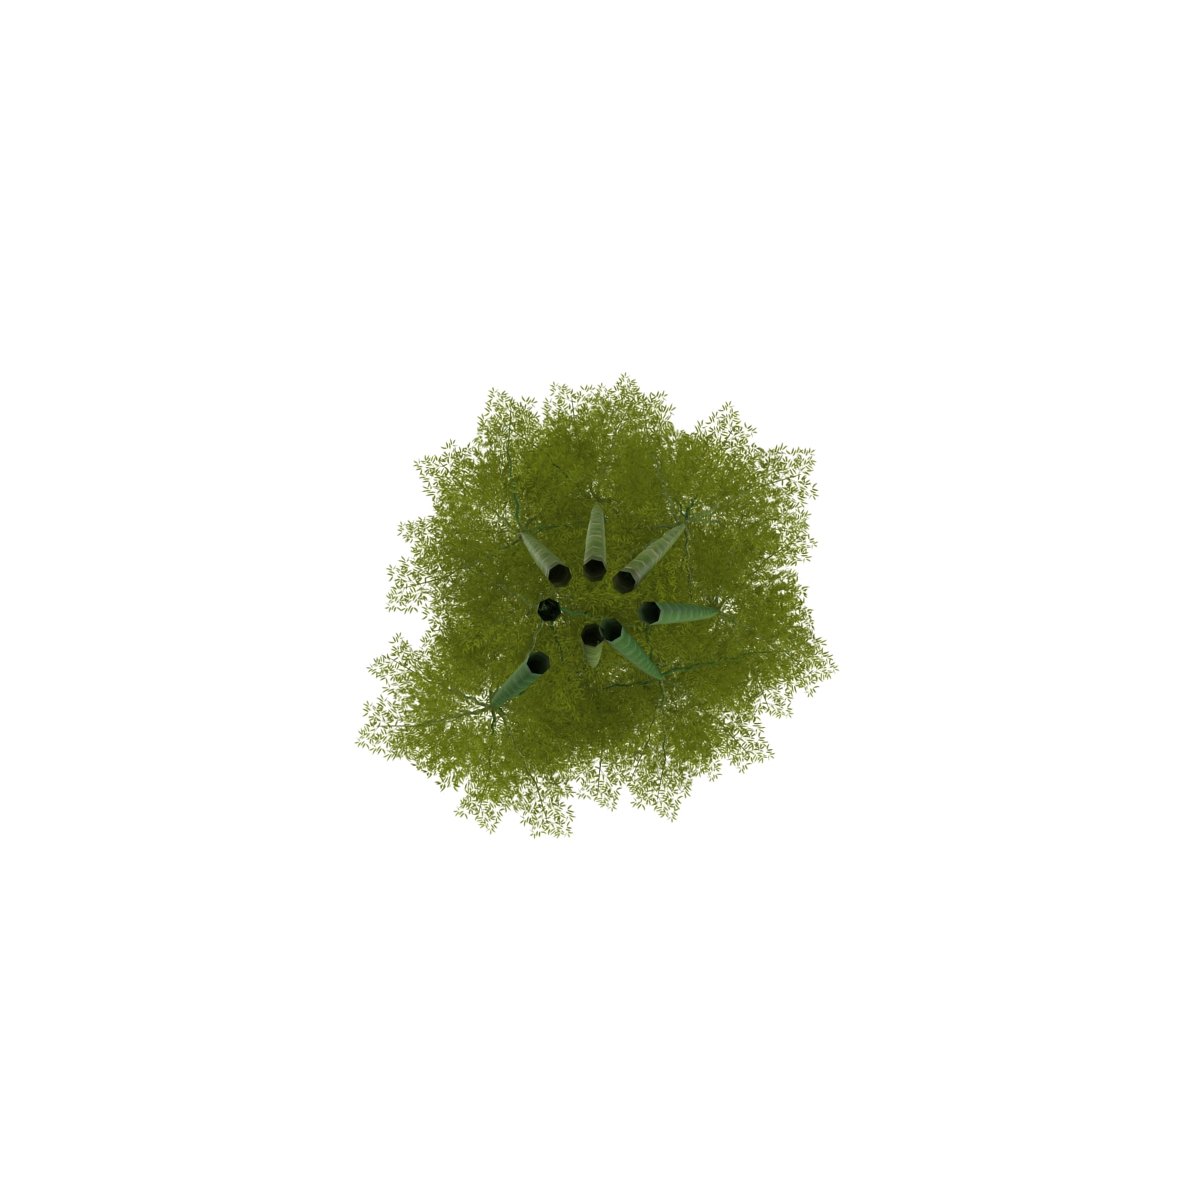 Group of green plants in the middle of a white background.